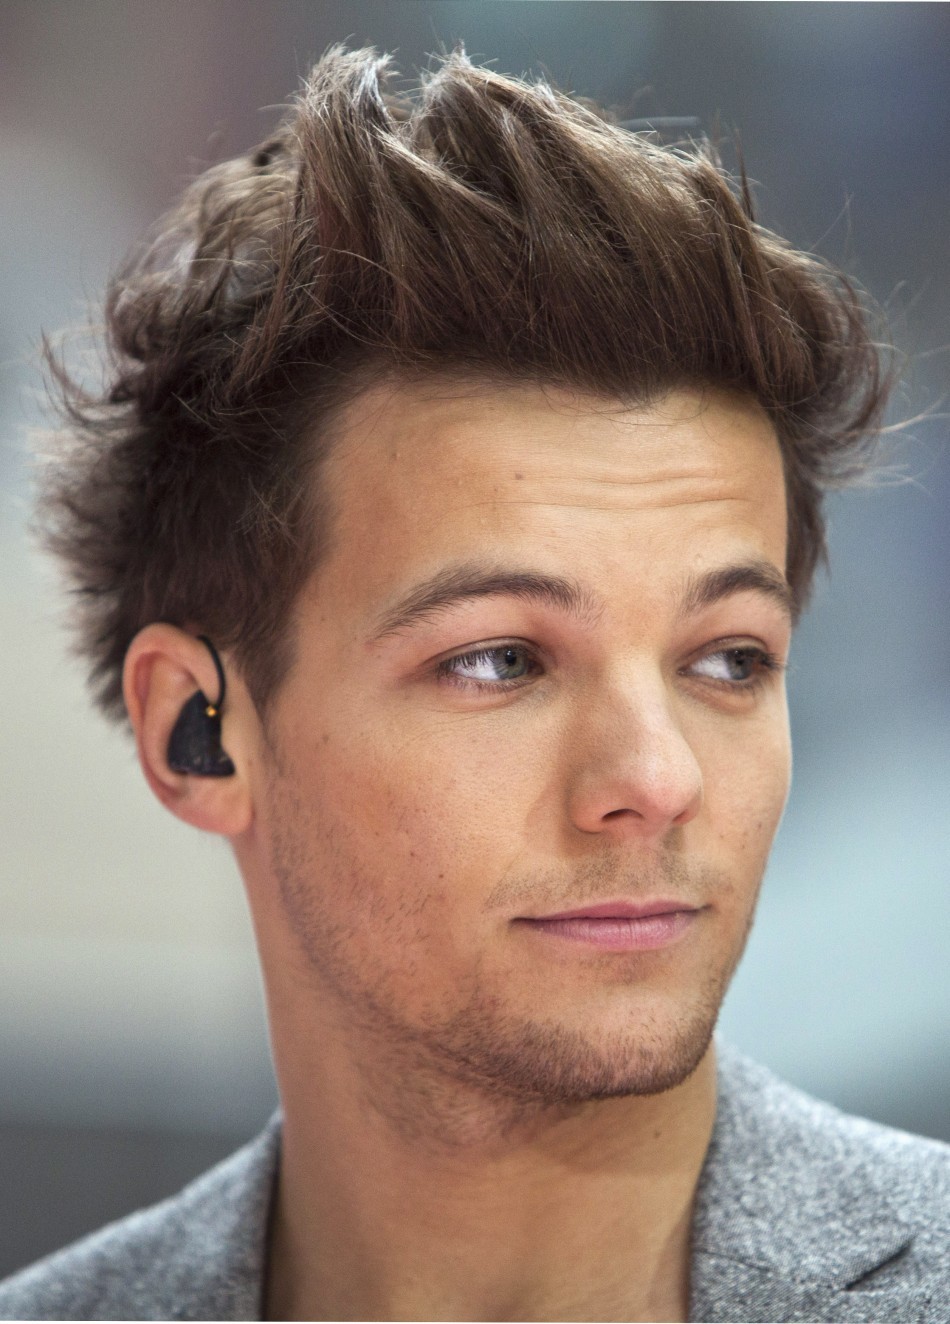 Louis Tomlinson rumours: One Direction star&#39;s estranged father will &#39;drop a bombshell&#39;